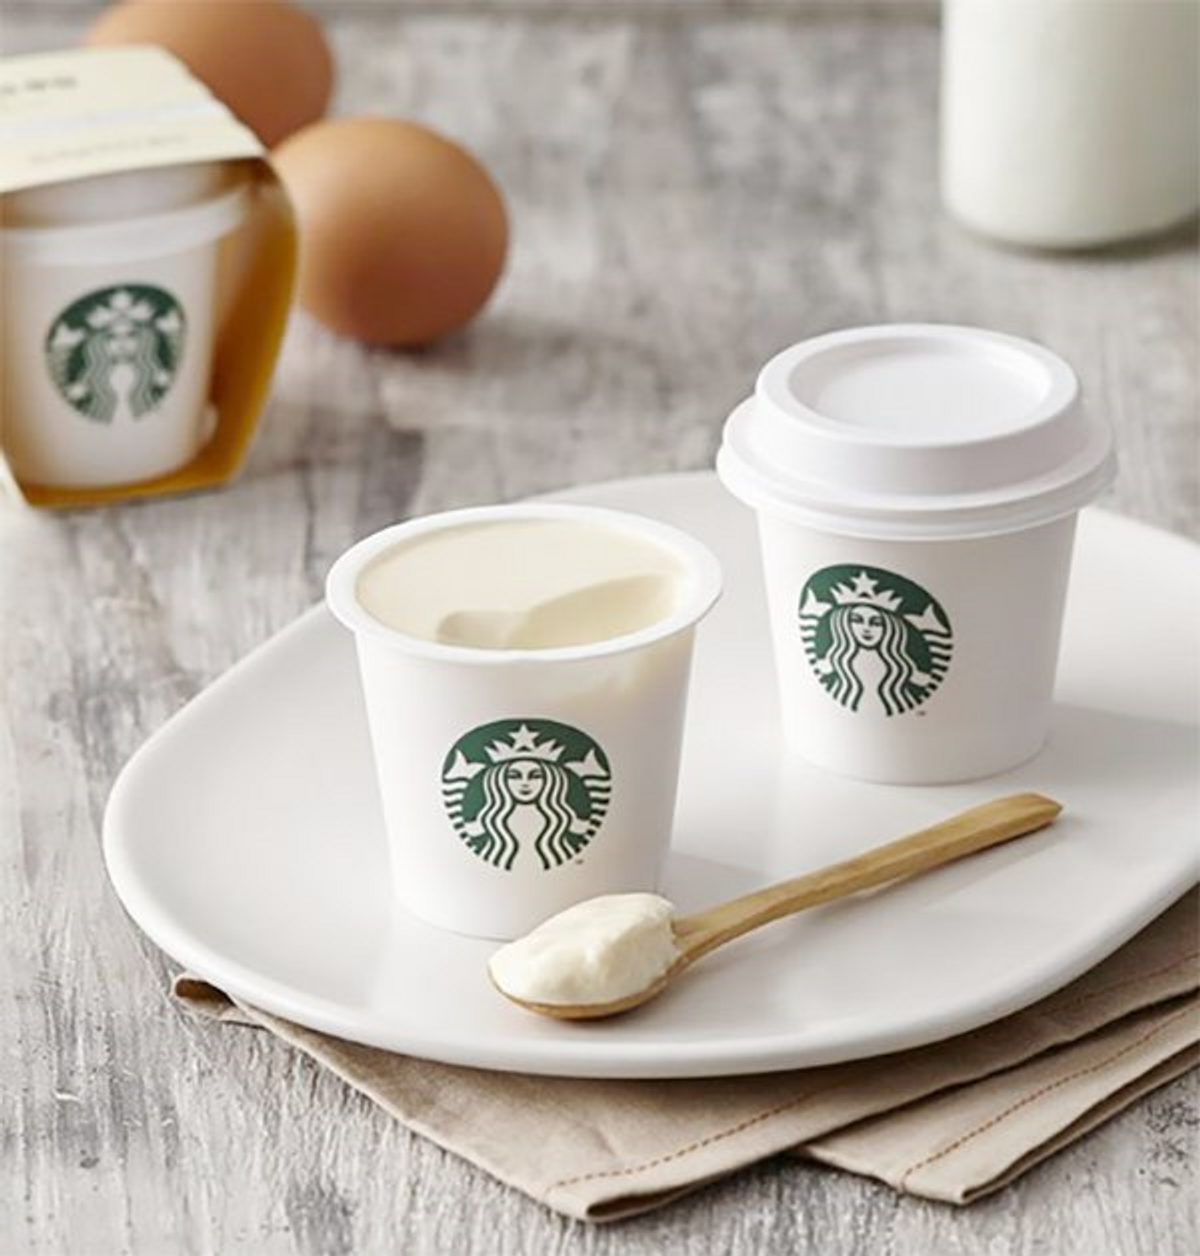 Starbucks Japan is offering holiday PUDDING